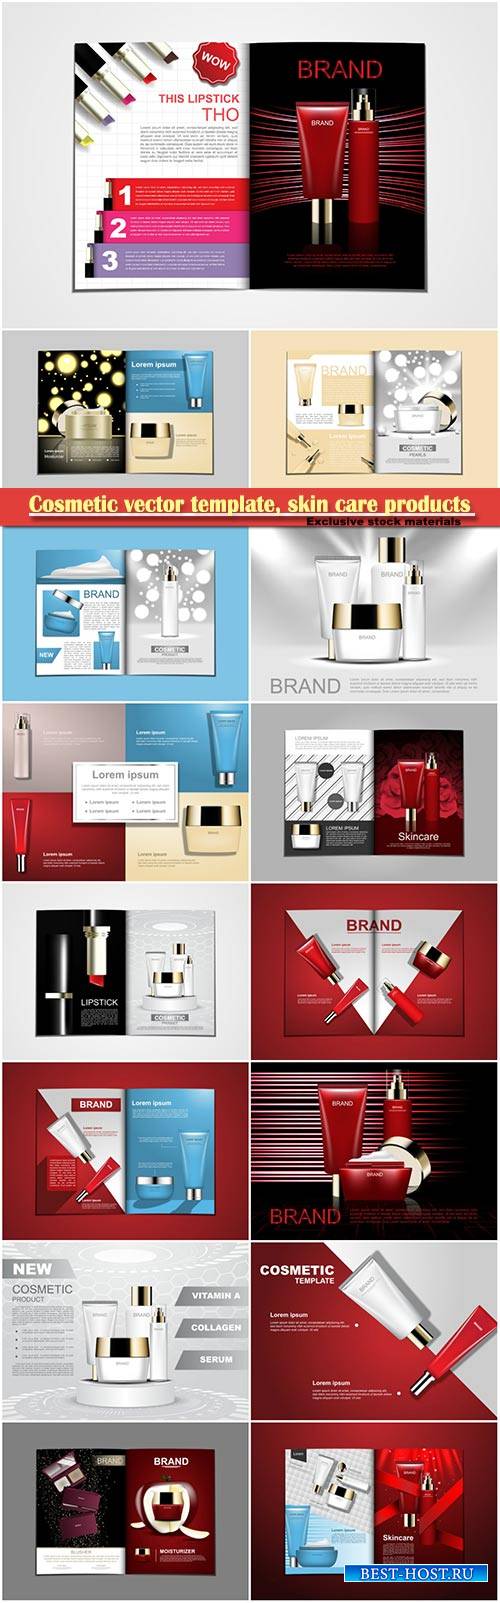 Cosmetic vector template, skin care products concept